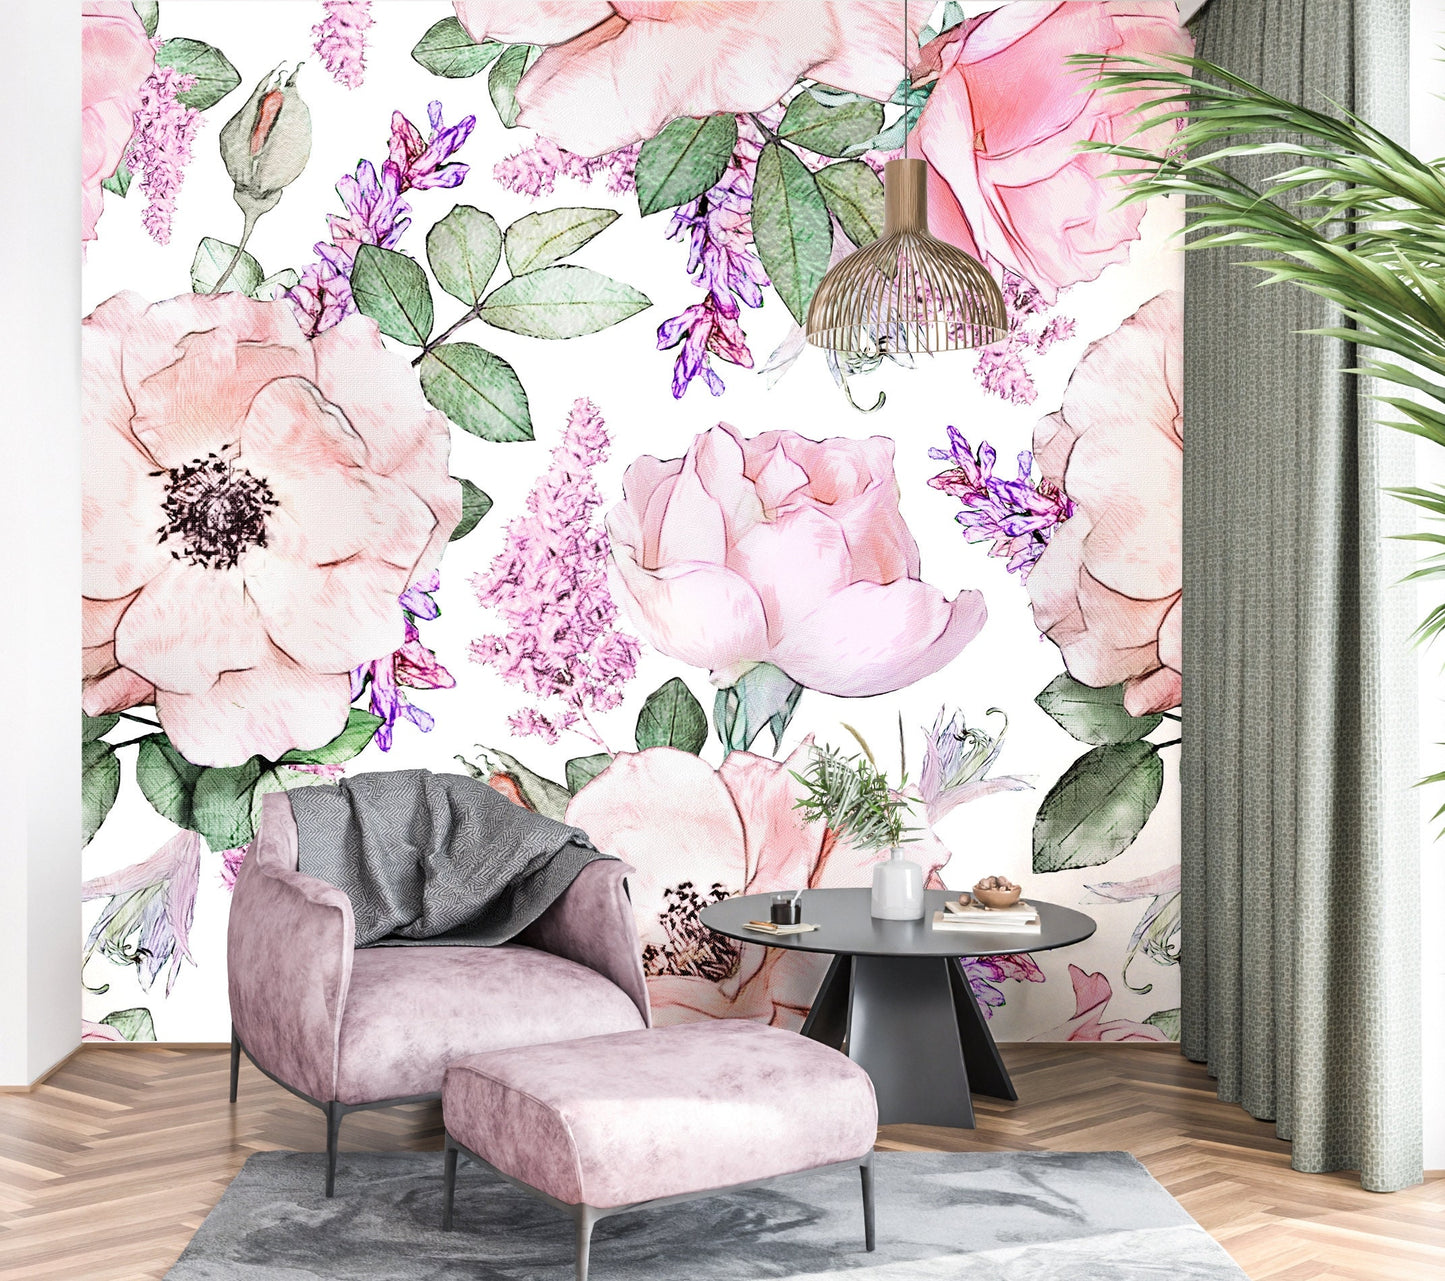 Pink Floral Wallpaper, Big Flower Wallpaper Peel and Stick, Peony Wallpaper, Nursery Wallpaper, Removable Wall Paper